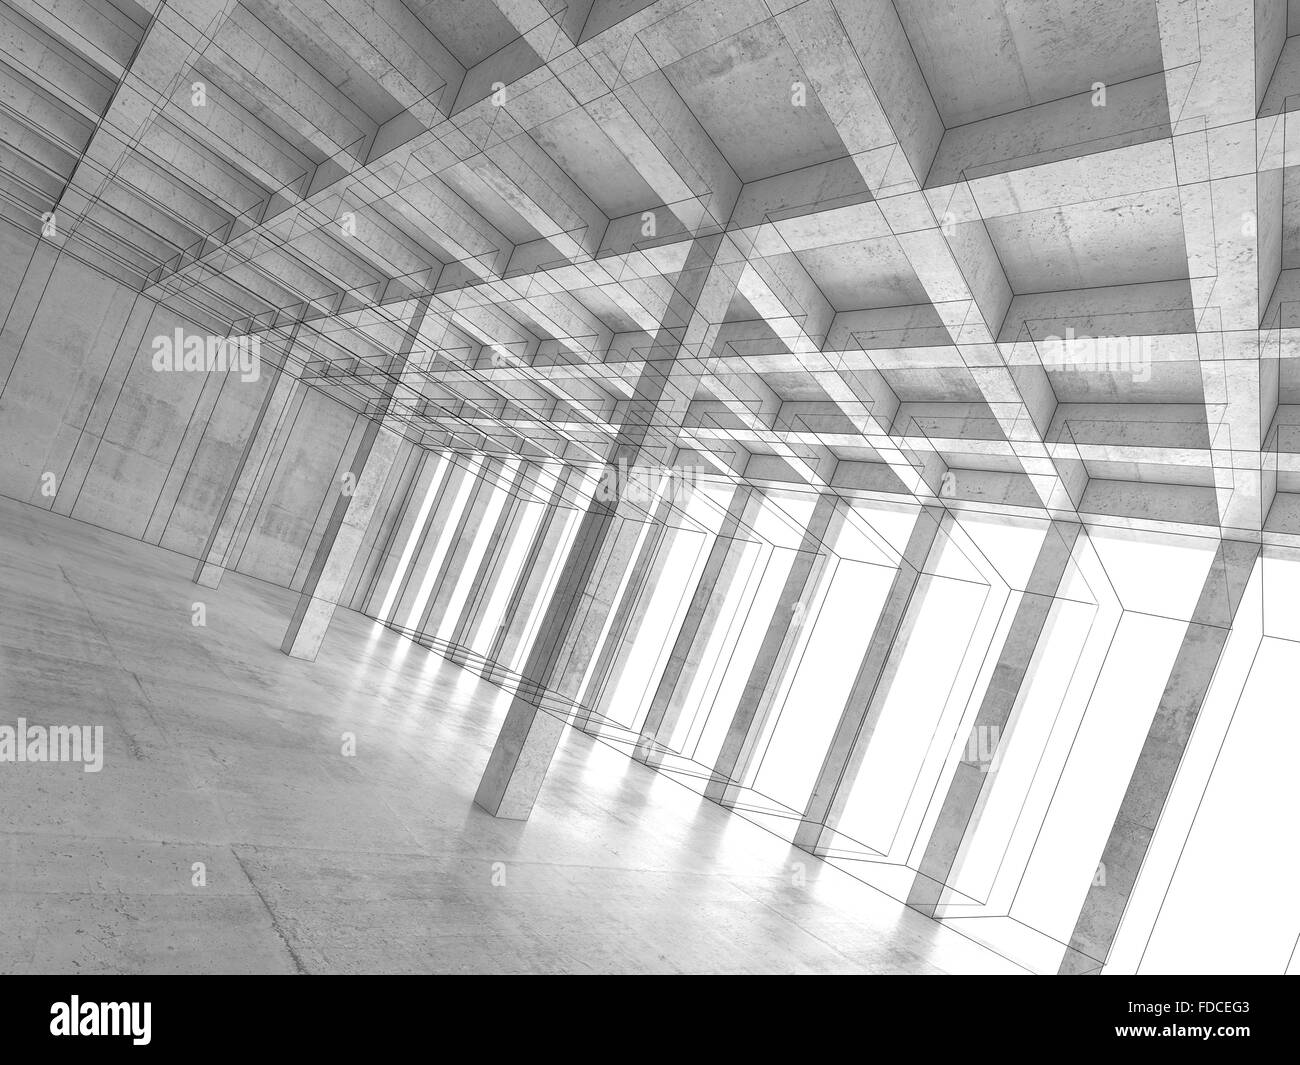 Abstract architecture background with perspective view of open space concrete room, 3d illustration, wire-frame effect Stock Photo